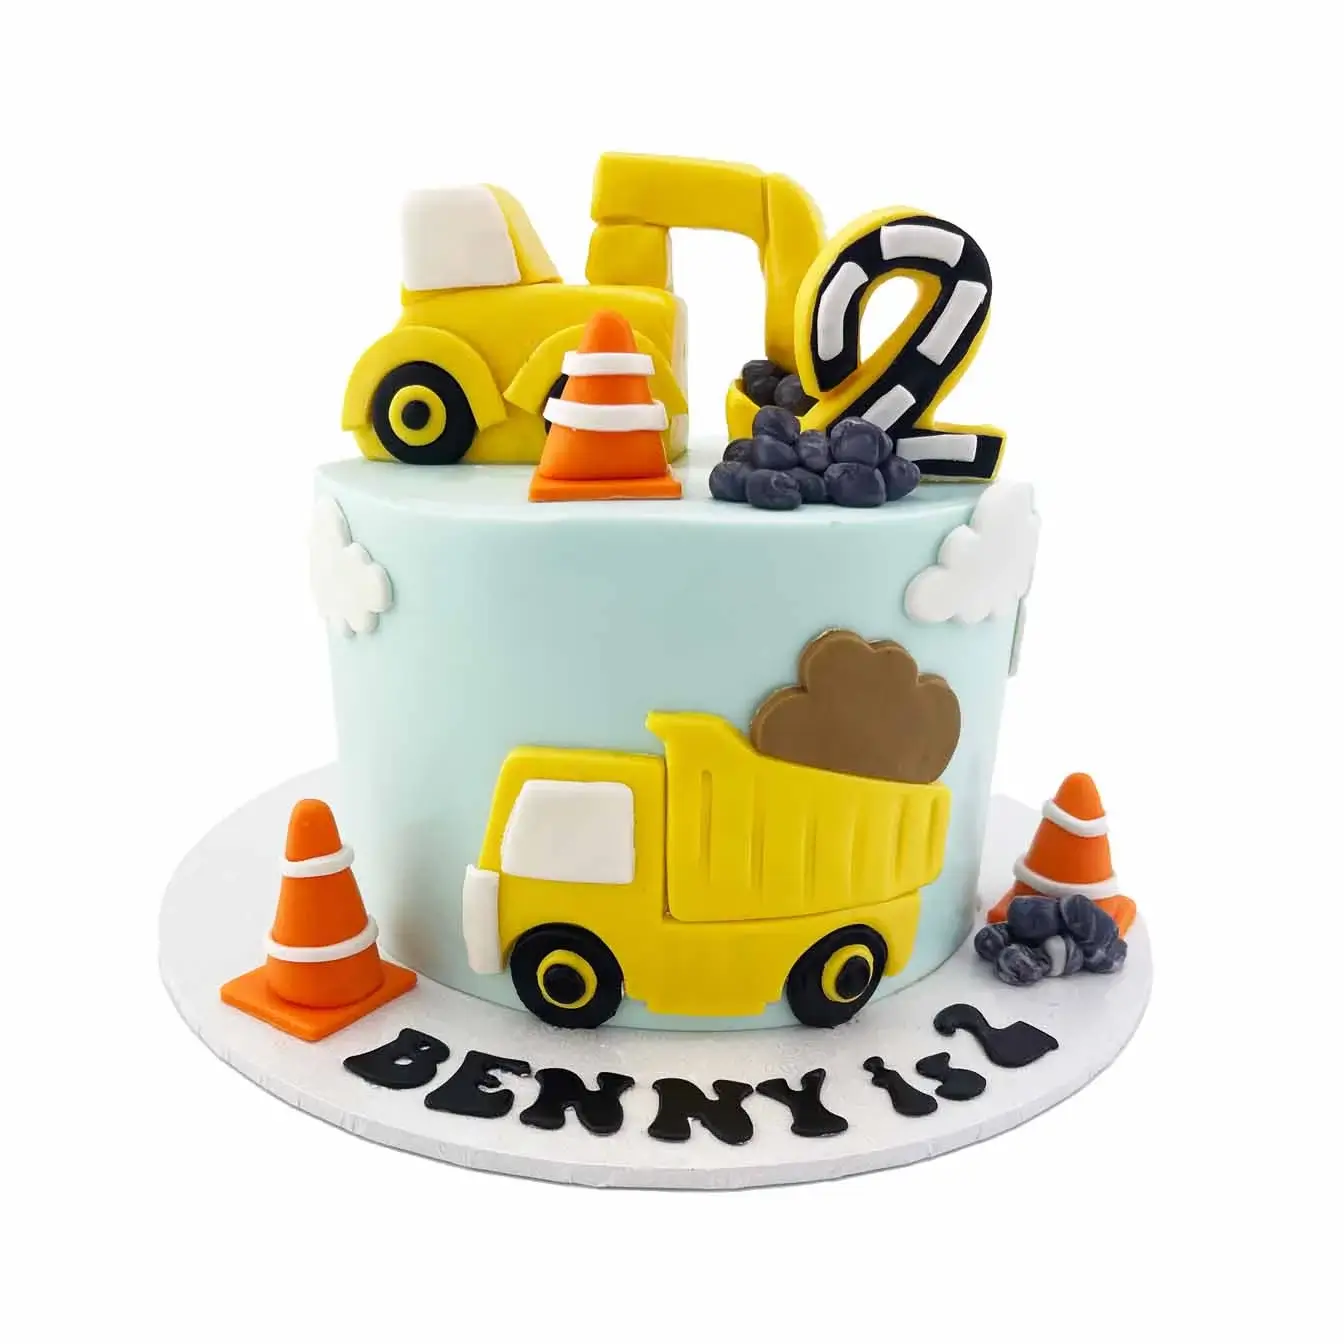 Make your little builder's day with our Kids Construction Cake! Featuring a model digger, cutout trucks, rubble, and traffic cones, this visually impressive cake is the perfect centerpiece for any construction-themed party